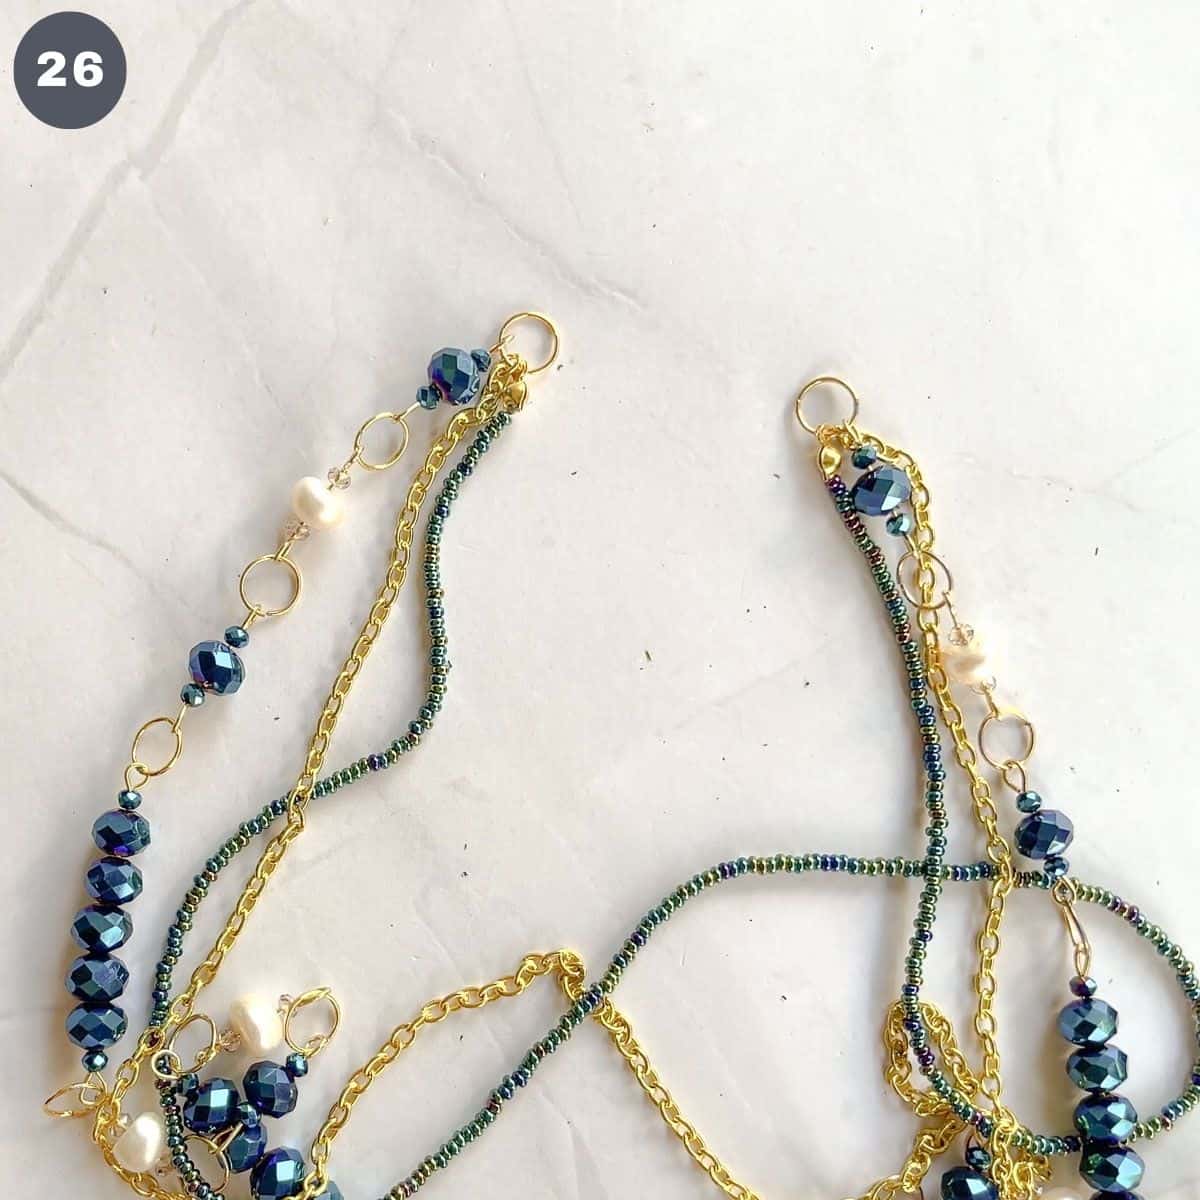 Jump rings at both ends of a multi layer necklace.